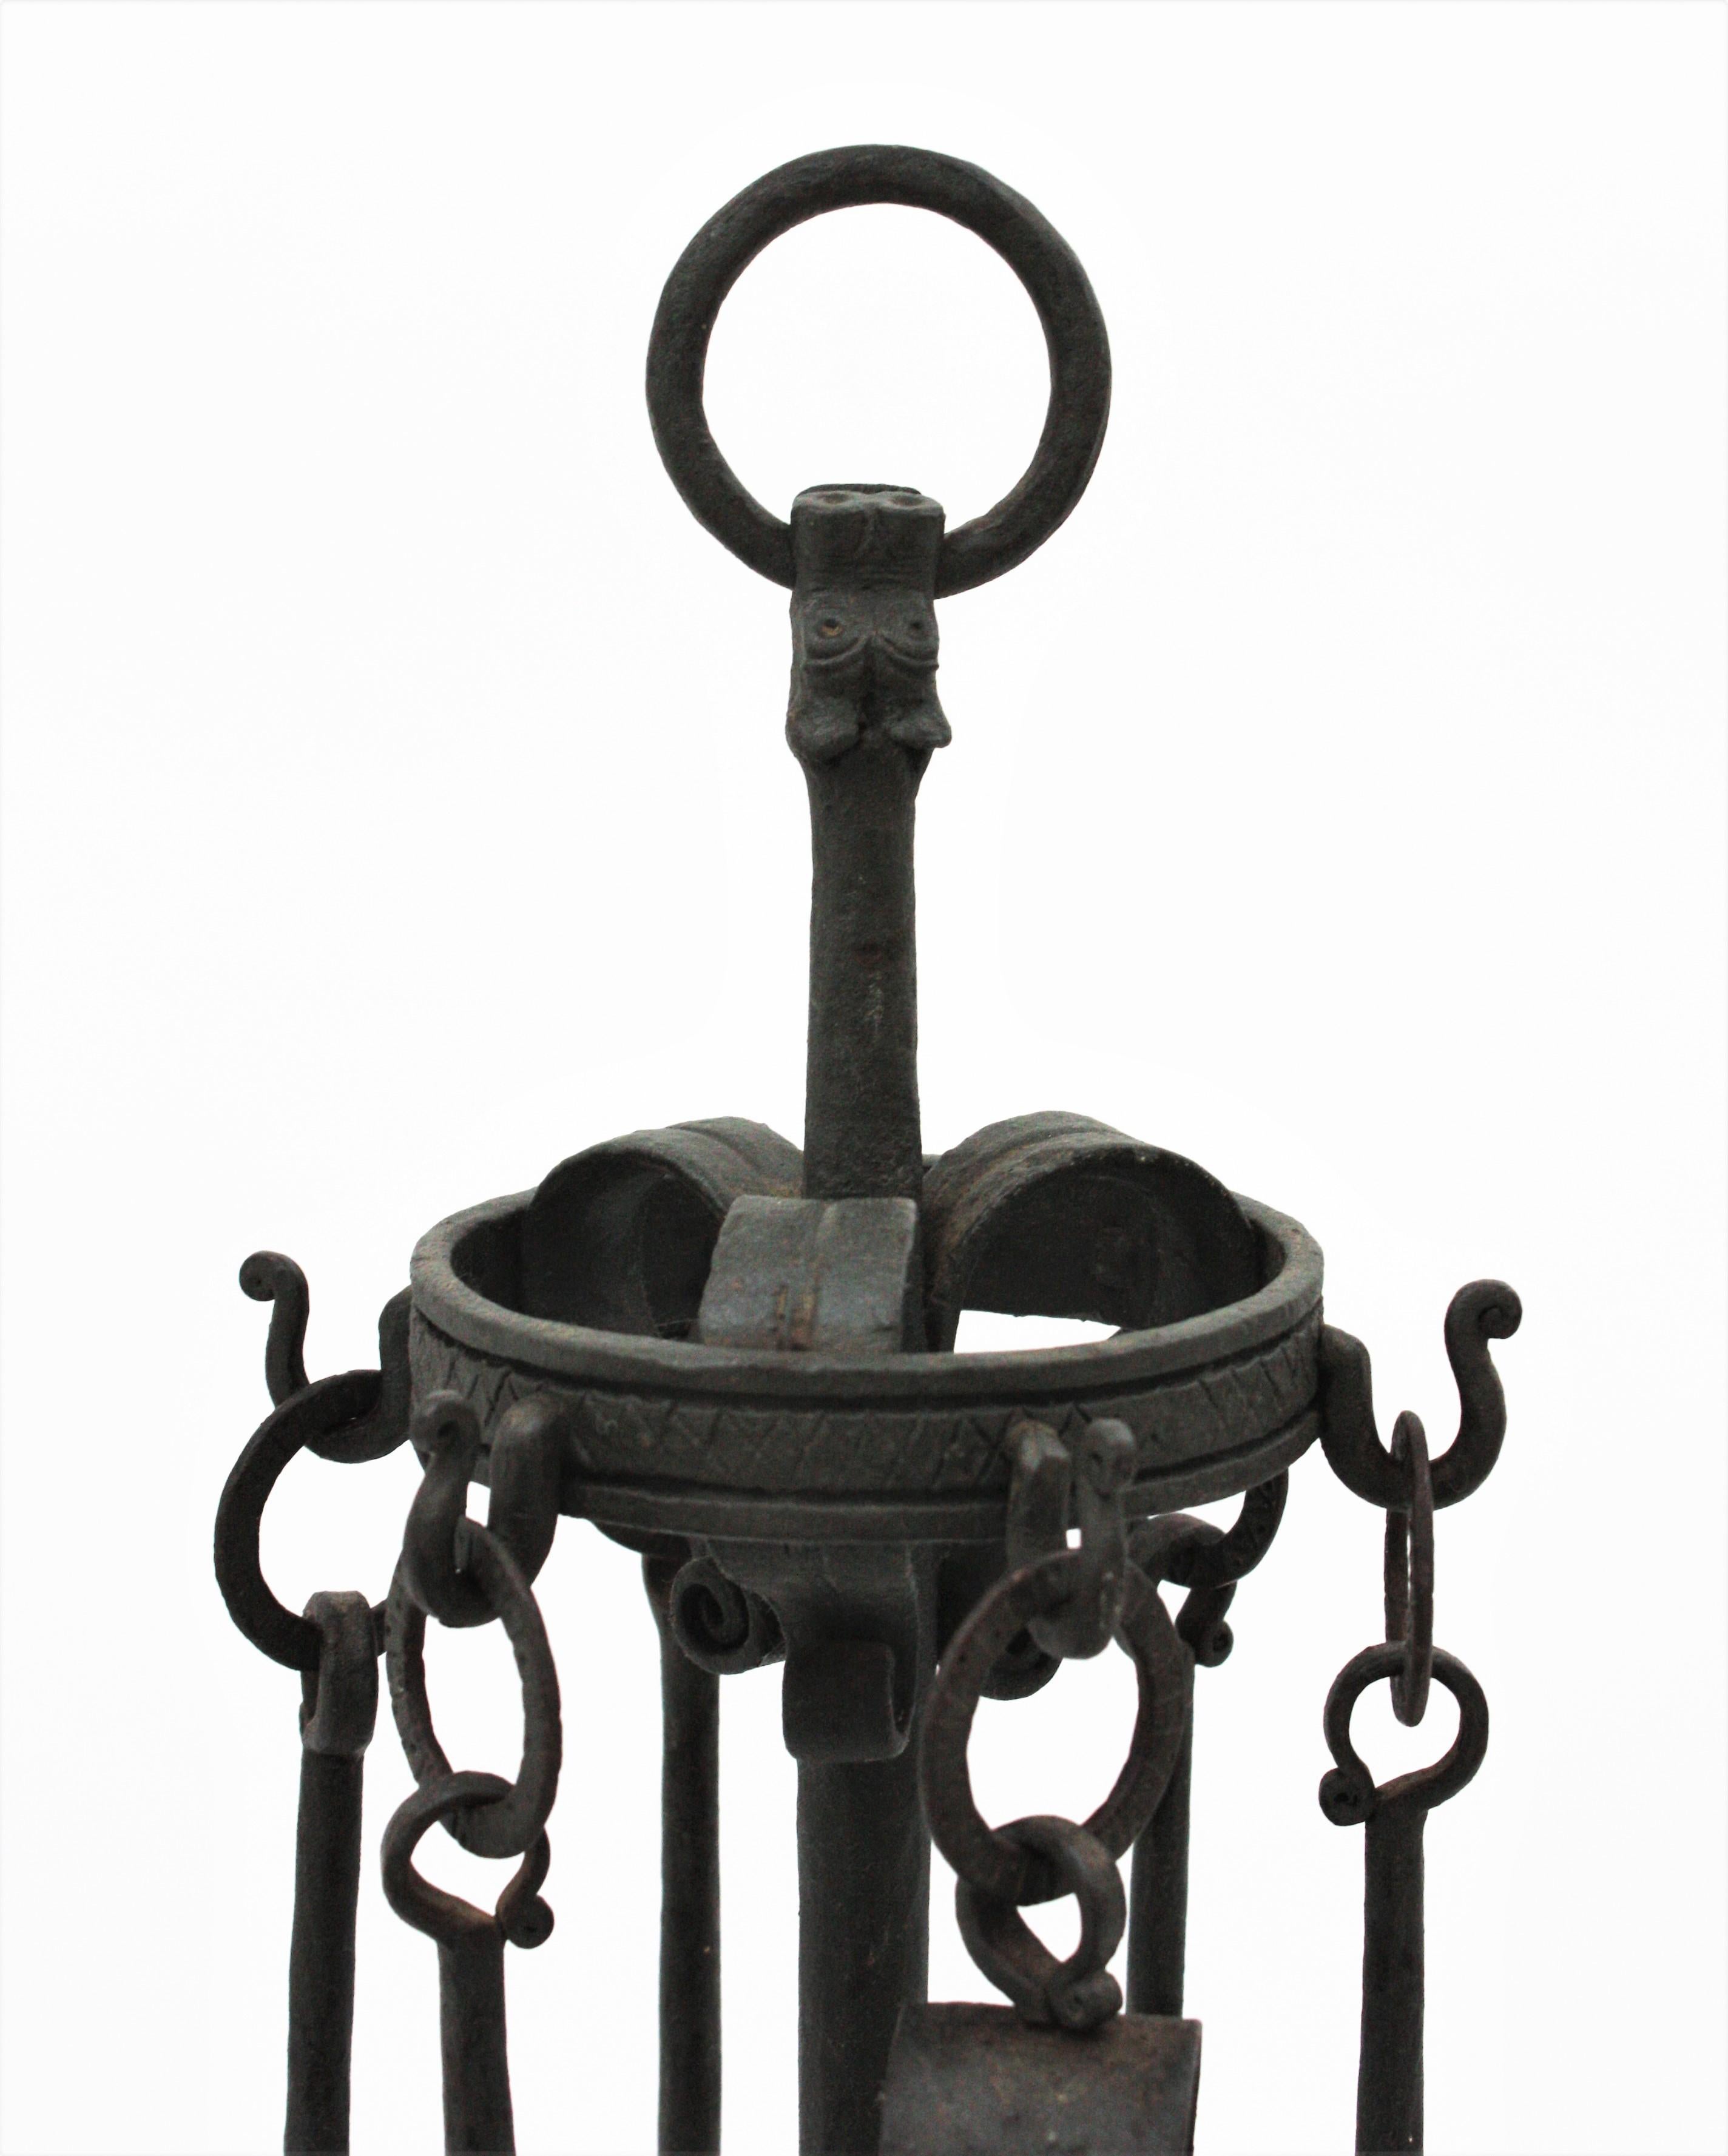 Forged Spanish Gothic Revival Fireplace Tools Stand in Wrought Iron with Dragon Motif